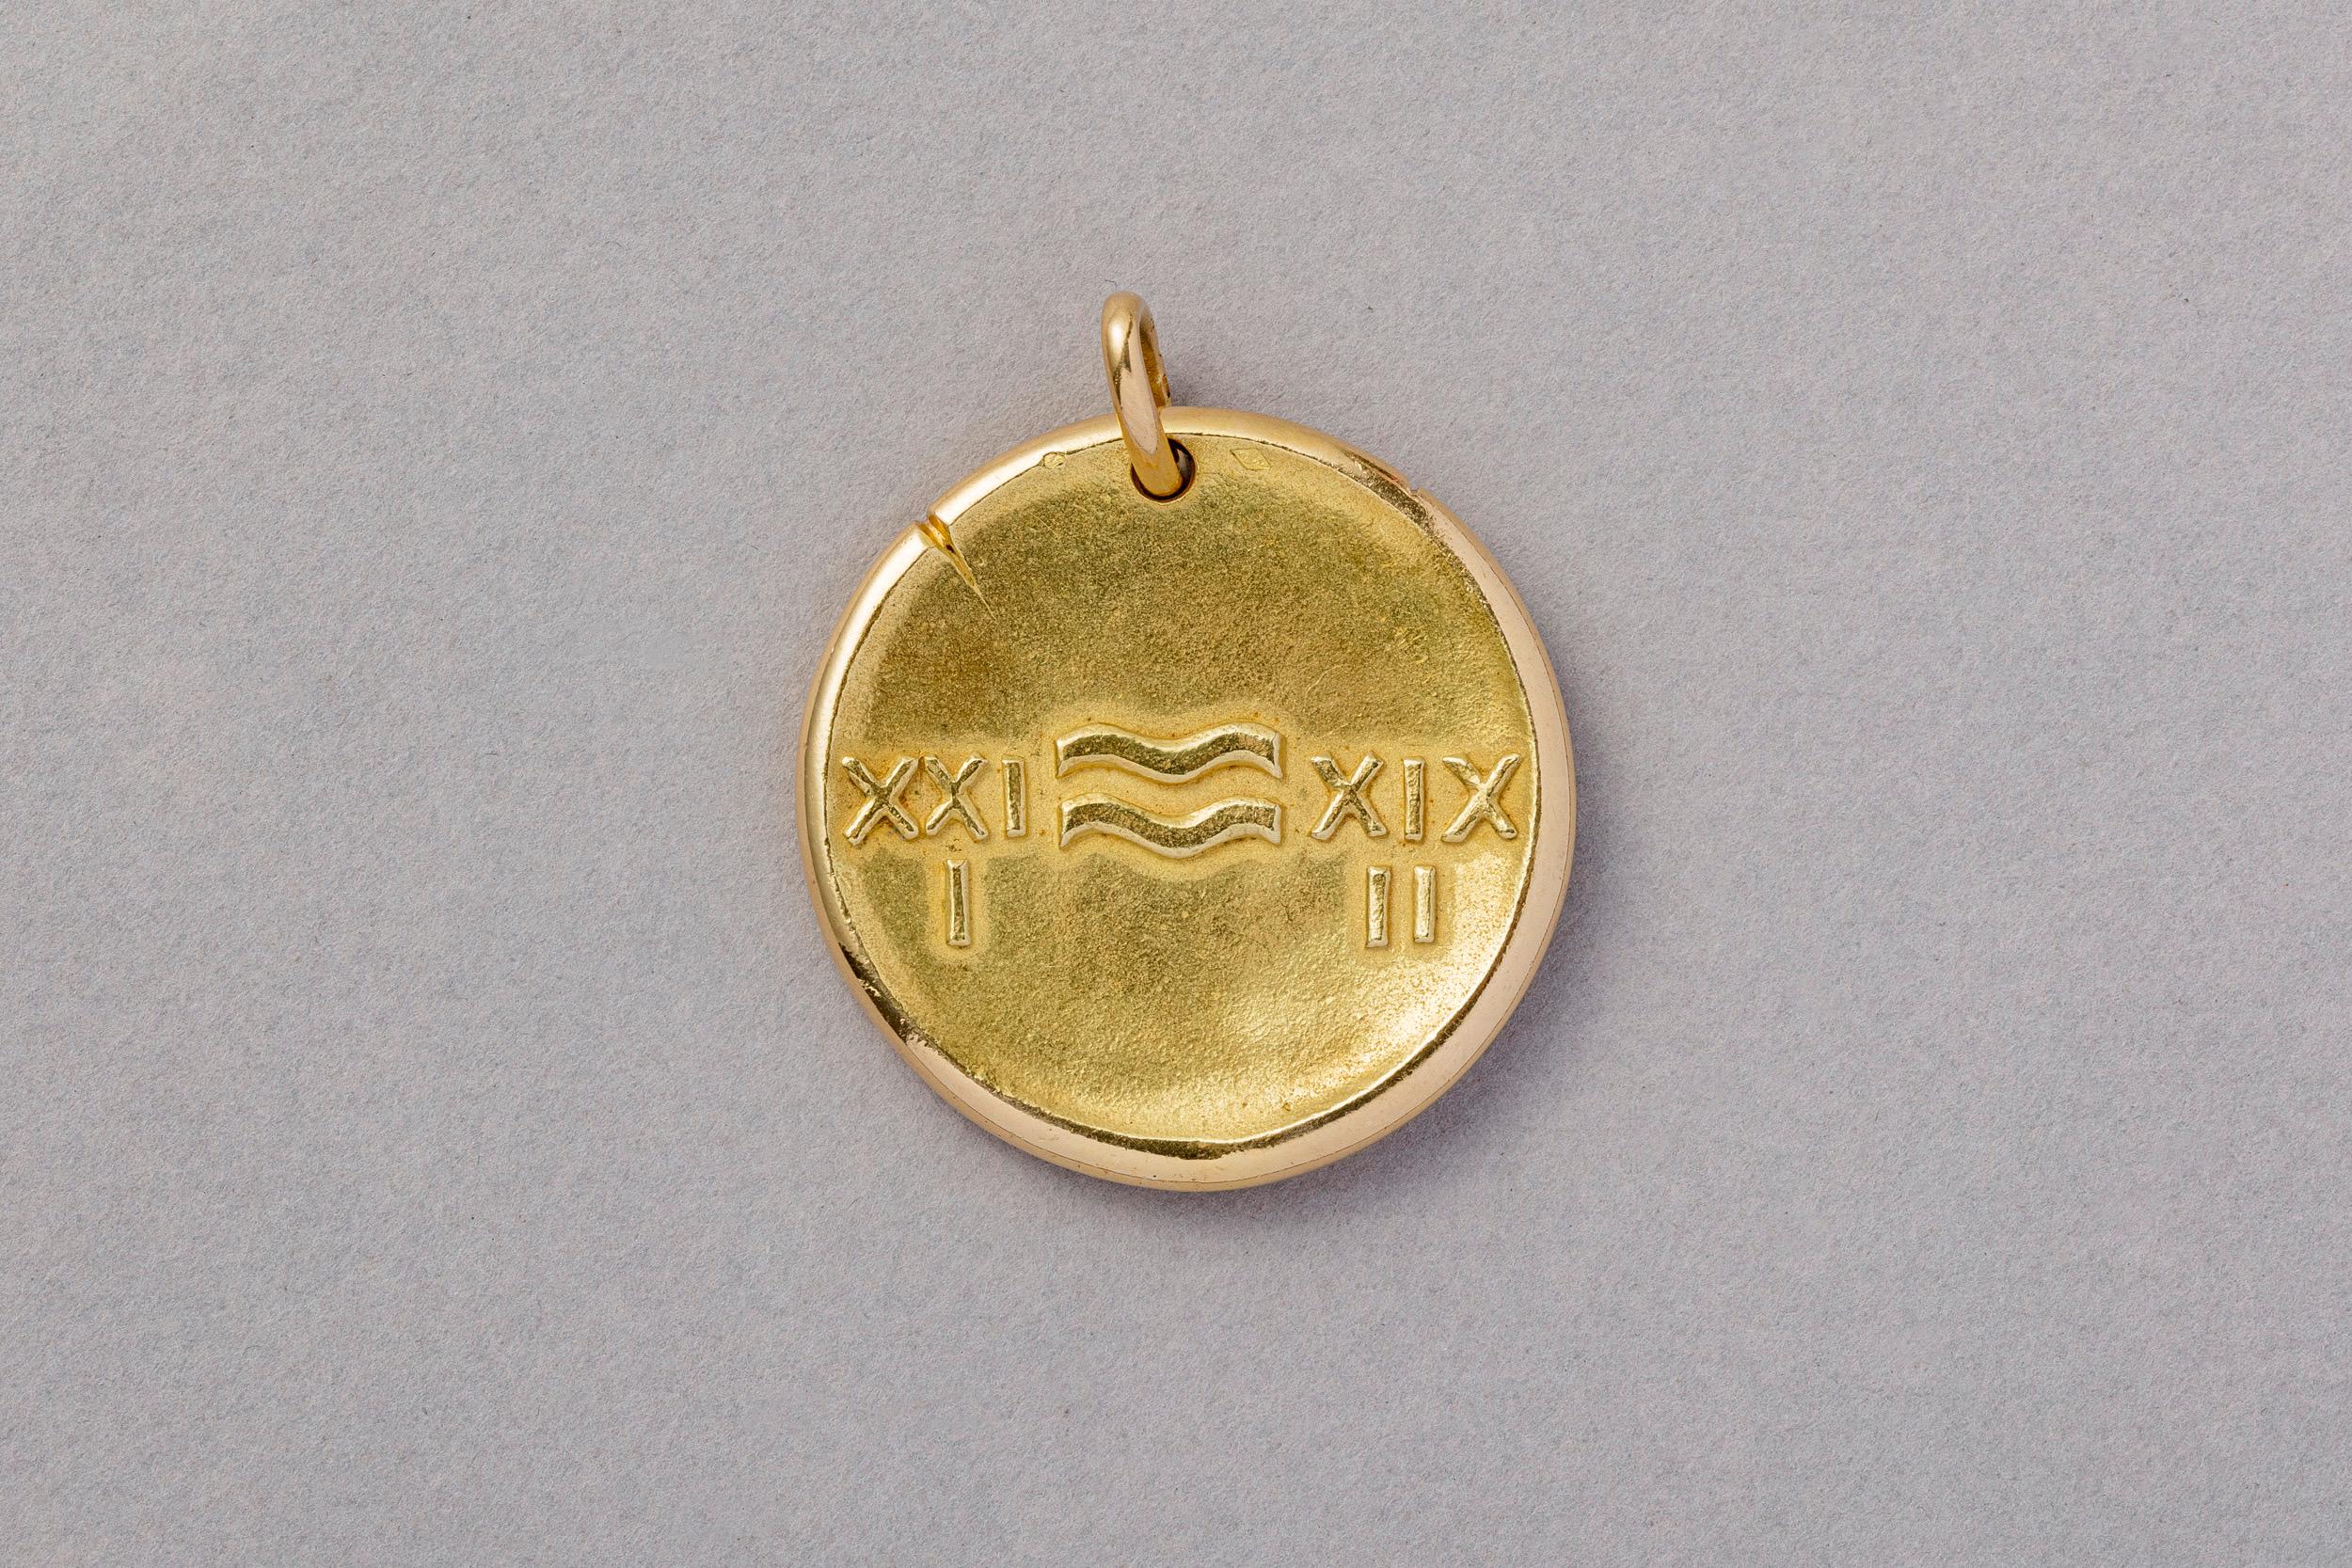 So rare! This 18 carat gold jumbo size Aquarius zodiac pendant. The Aquarius explores boundaries and challenging conventions. The pendant is signed: VCA for Van Cleef & Arpels, numbered: 127261, and bears the mastermark for George Lenfant and the